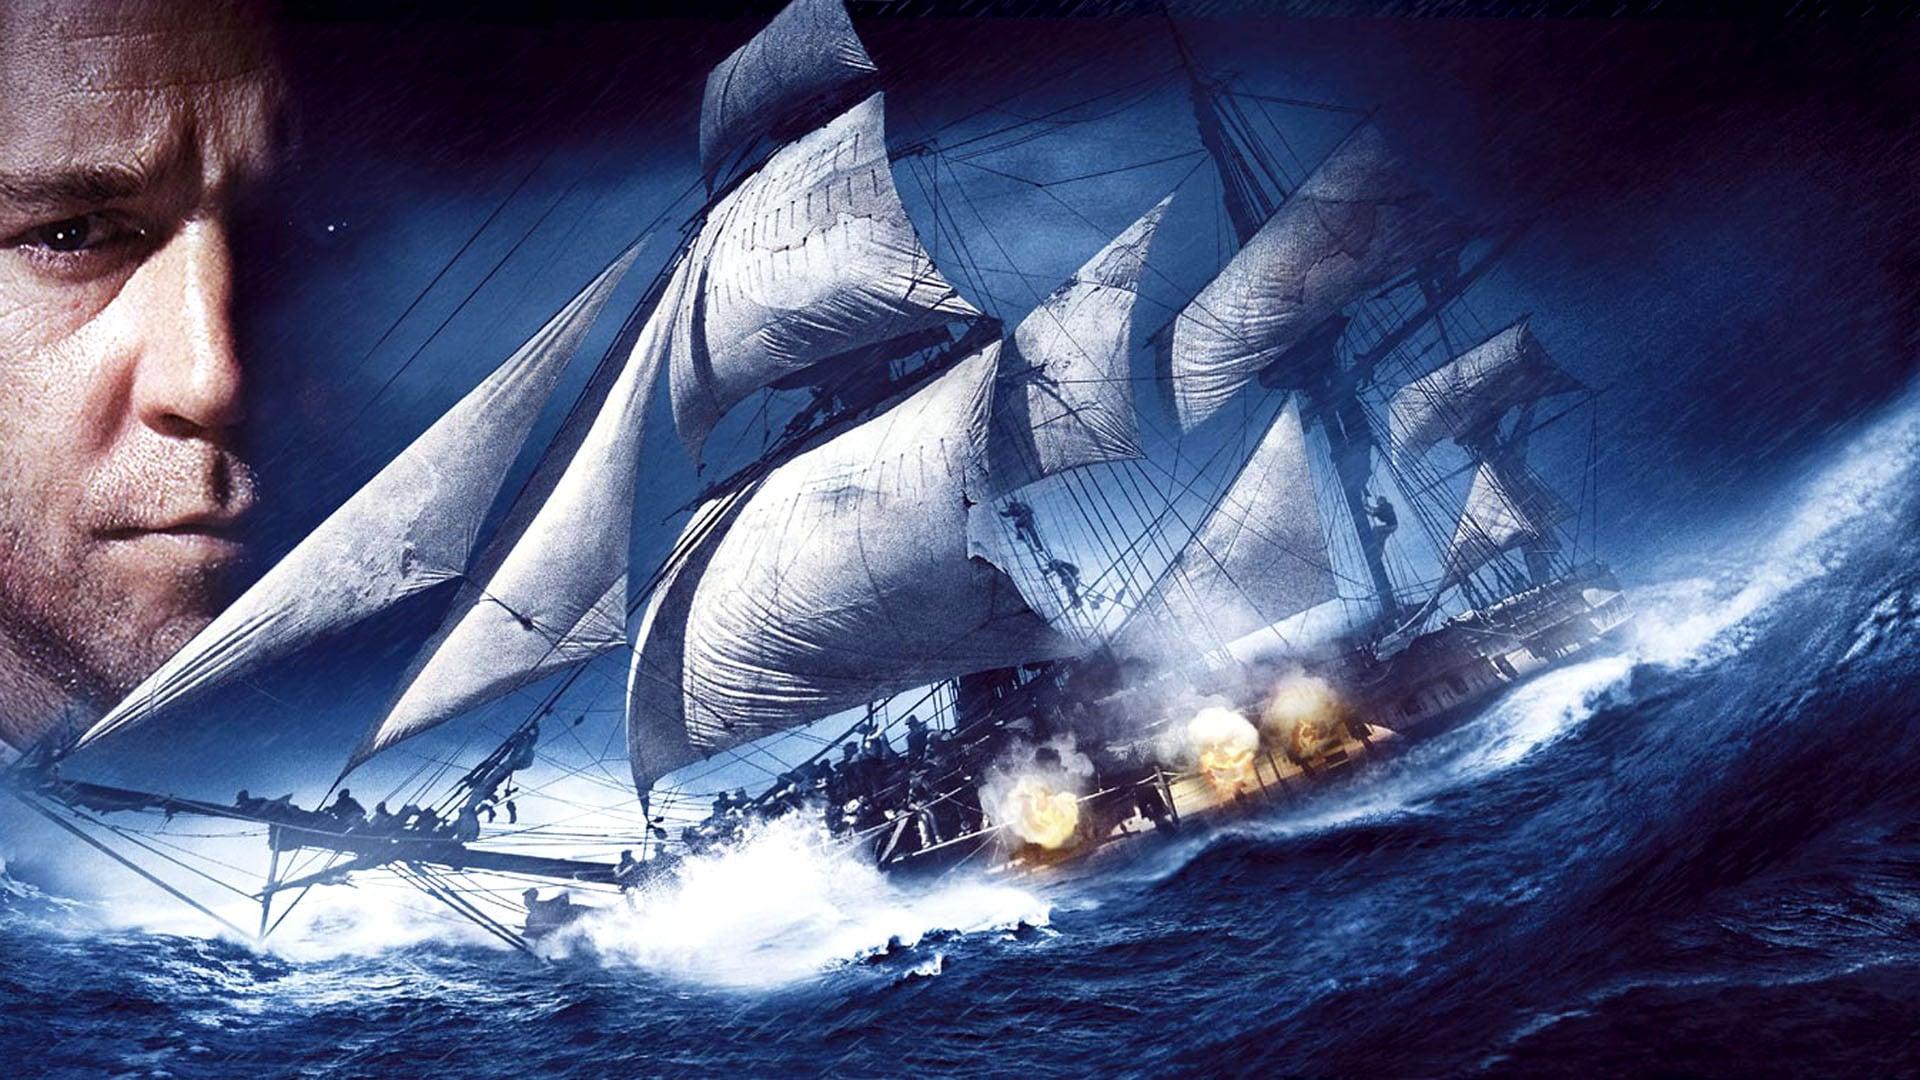 Backdrop Image for Master and Commander: The Far Side of the World